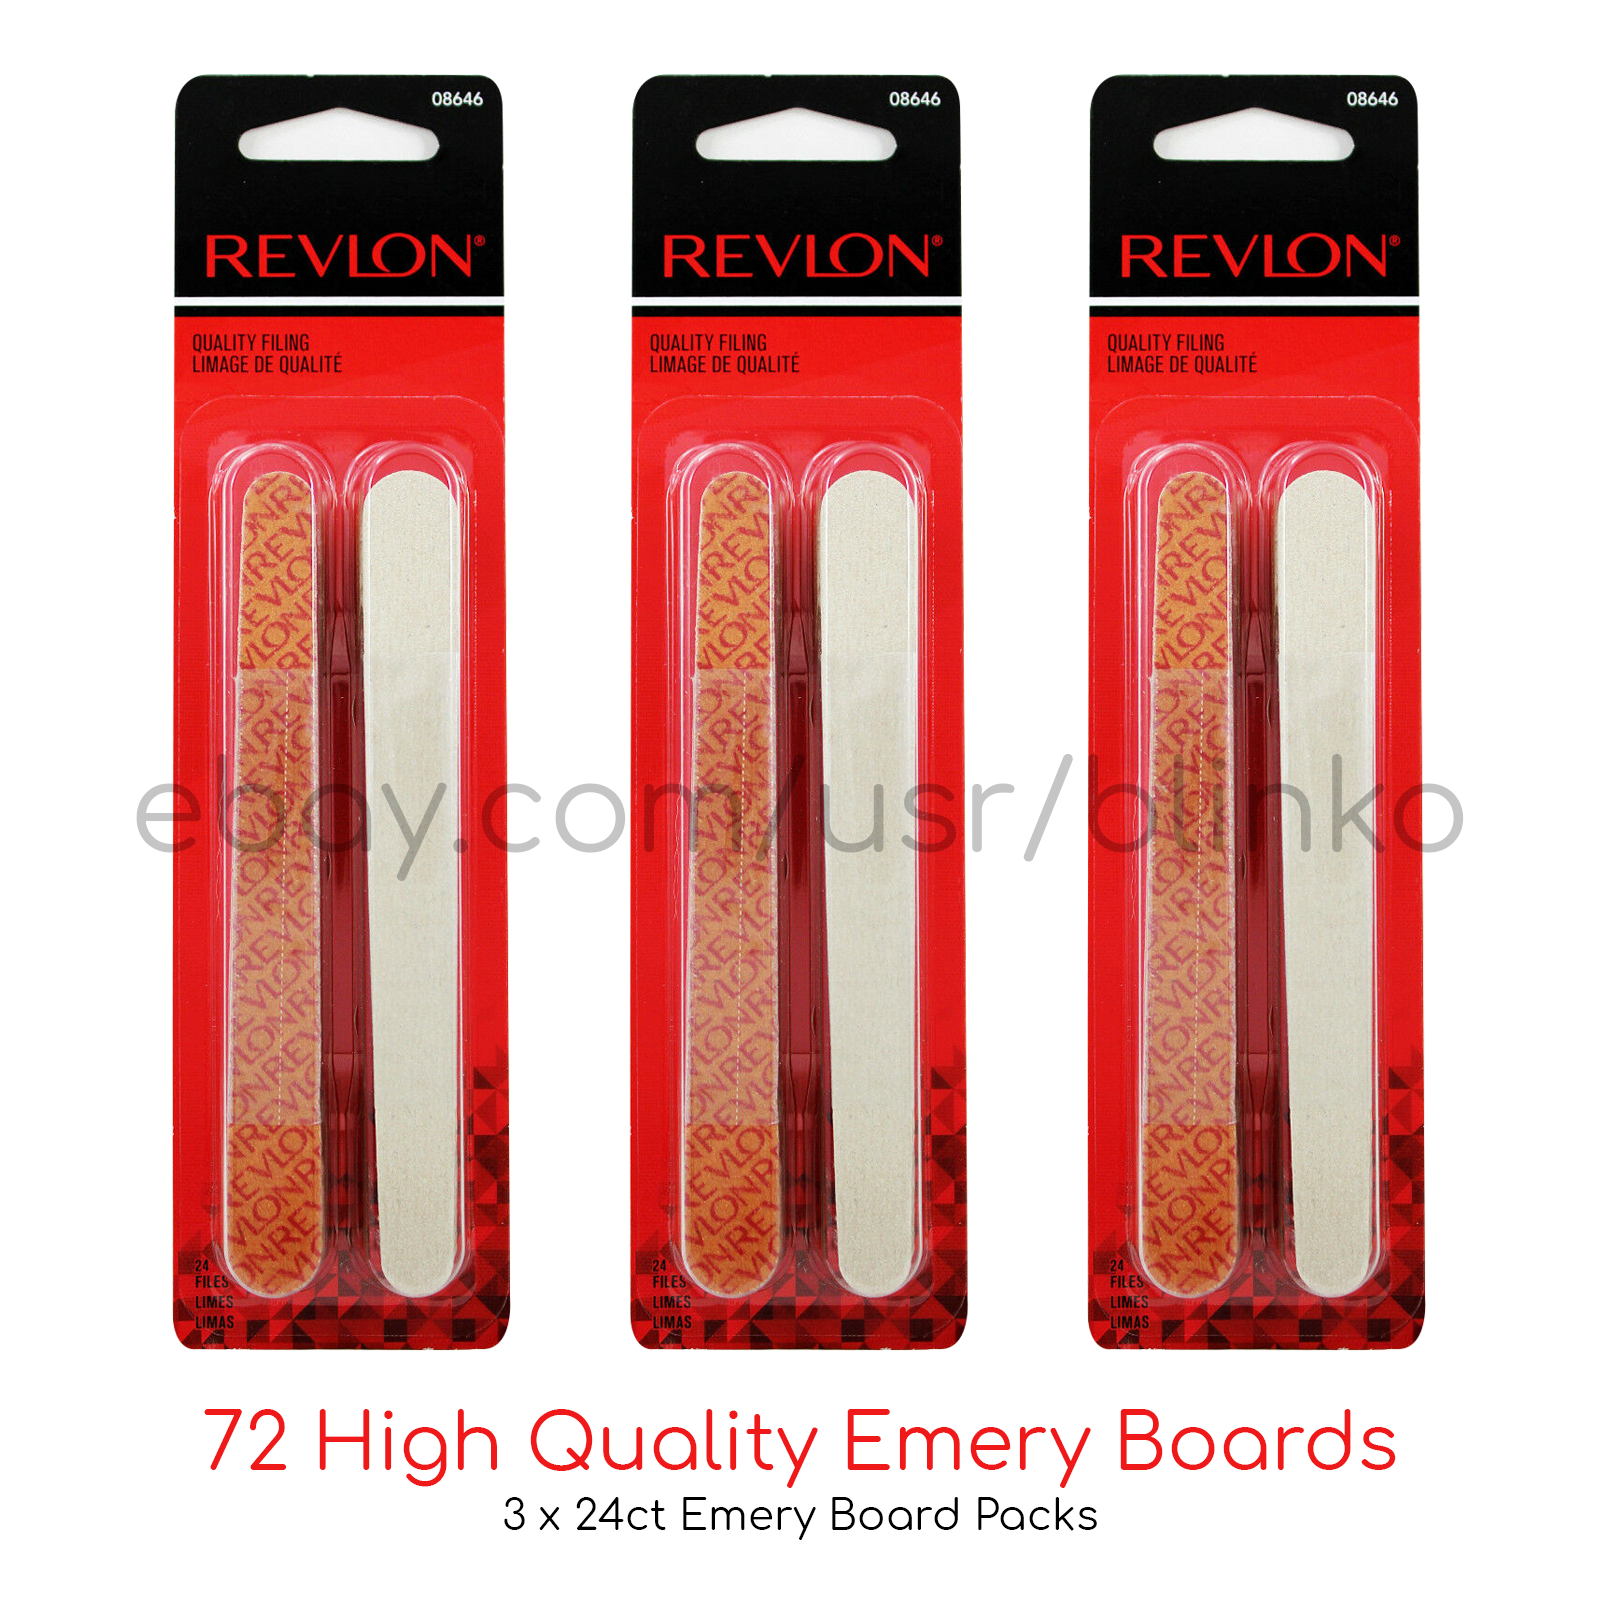 3 Pack / 24 ct Revlon Compact High Quality 72 Emery Boards Nail File Dual 08646 Revlon 08646